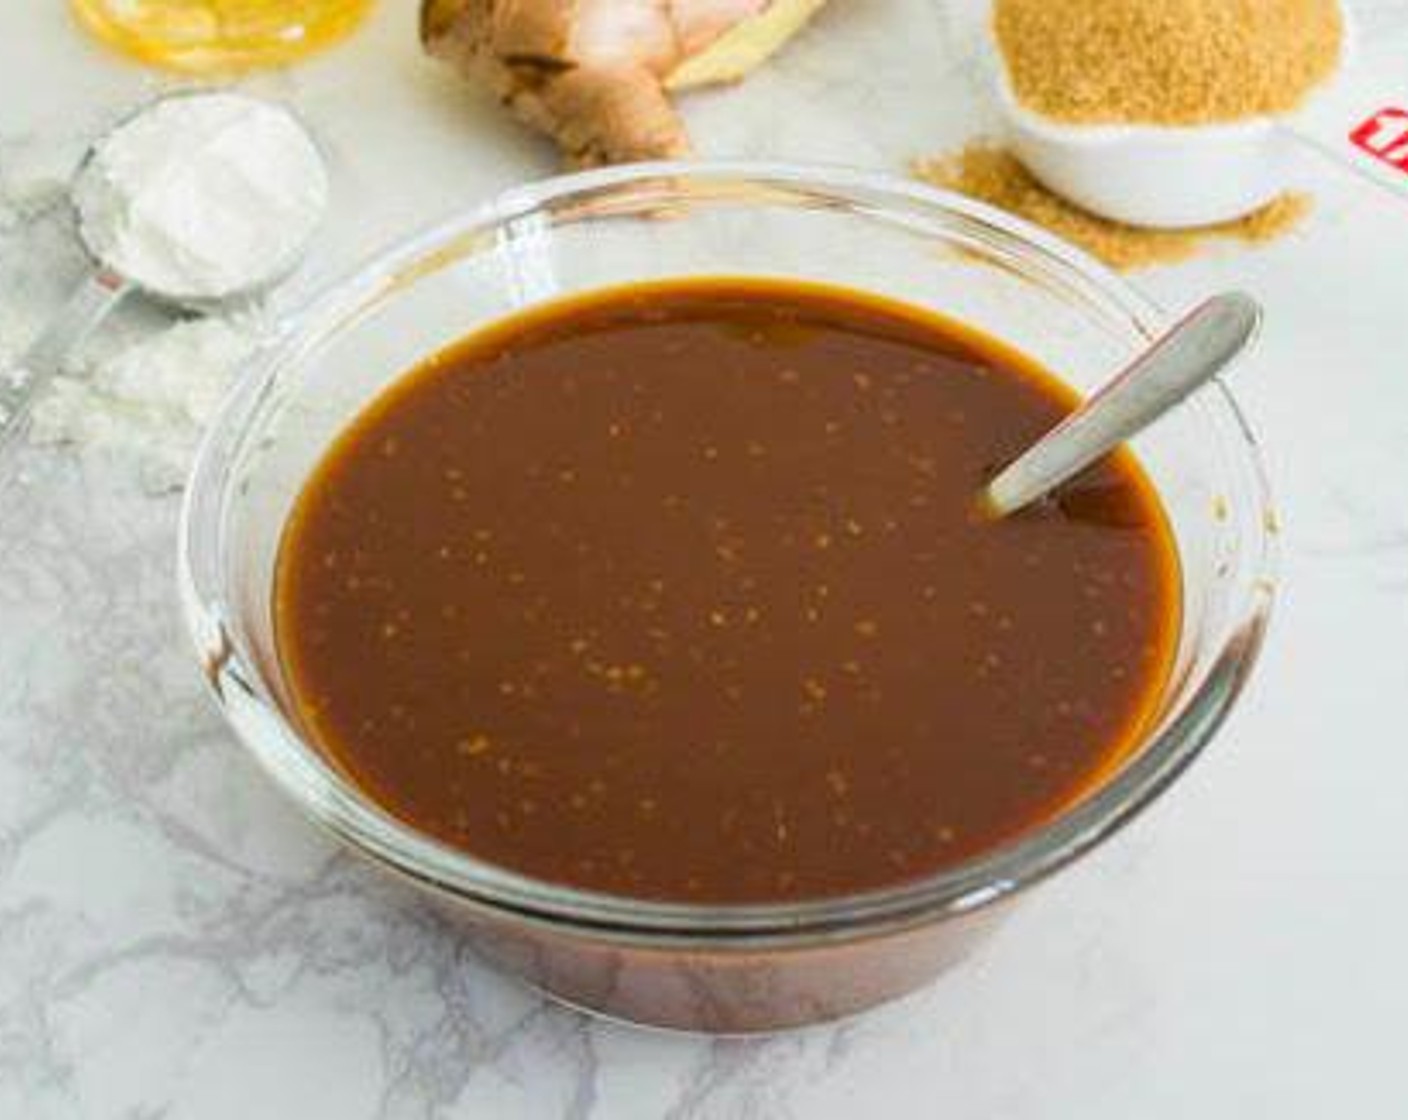 step 1 Prepare the sauce by combining Water (1 cup), Soy Sauce (1/2 cup), Mirin (2 Tbsp), Honey (1/2 Tbsp), Brown Sugar (1/4 cup), Fresh Ginger (1/2 tsp), and Corn Starch (2 Tbsp). Stir well to break up any corn starch lumps.